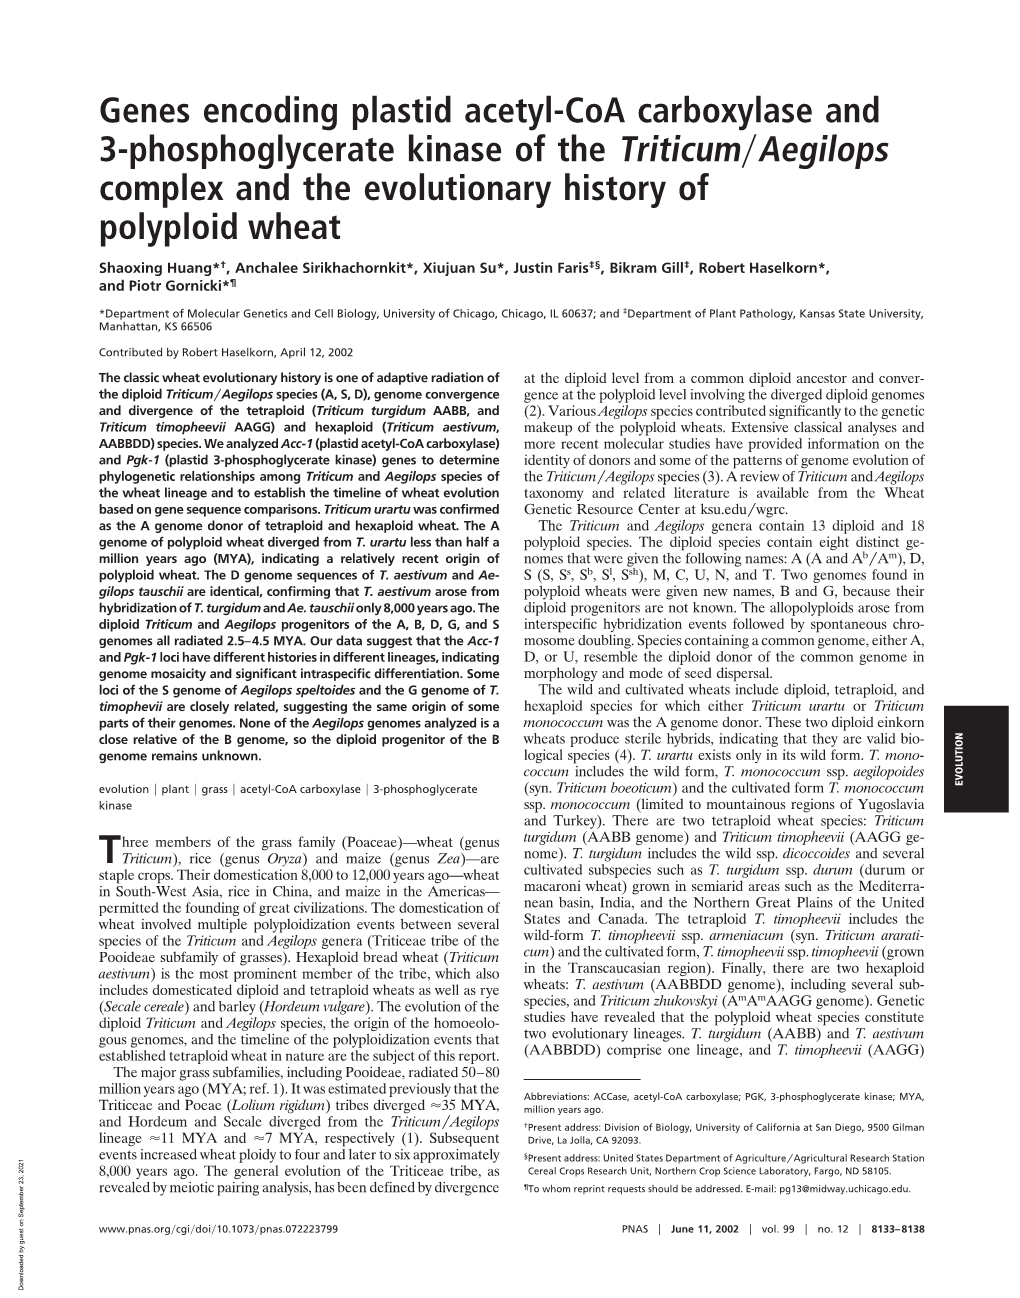 Genes Encoding Plastid Acetyl-Coa Carboxylase and 3-Phosphoglycerate Kinase of the Triticum͞aegilops Complex and the Evolutionary History of Polyploid Wheat